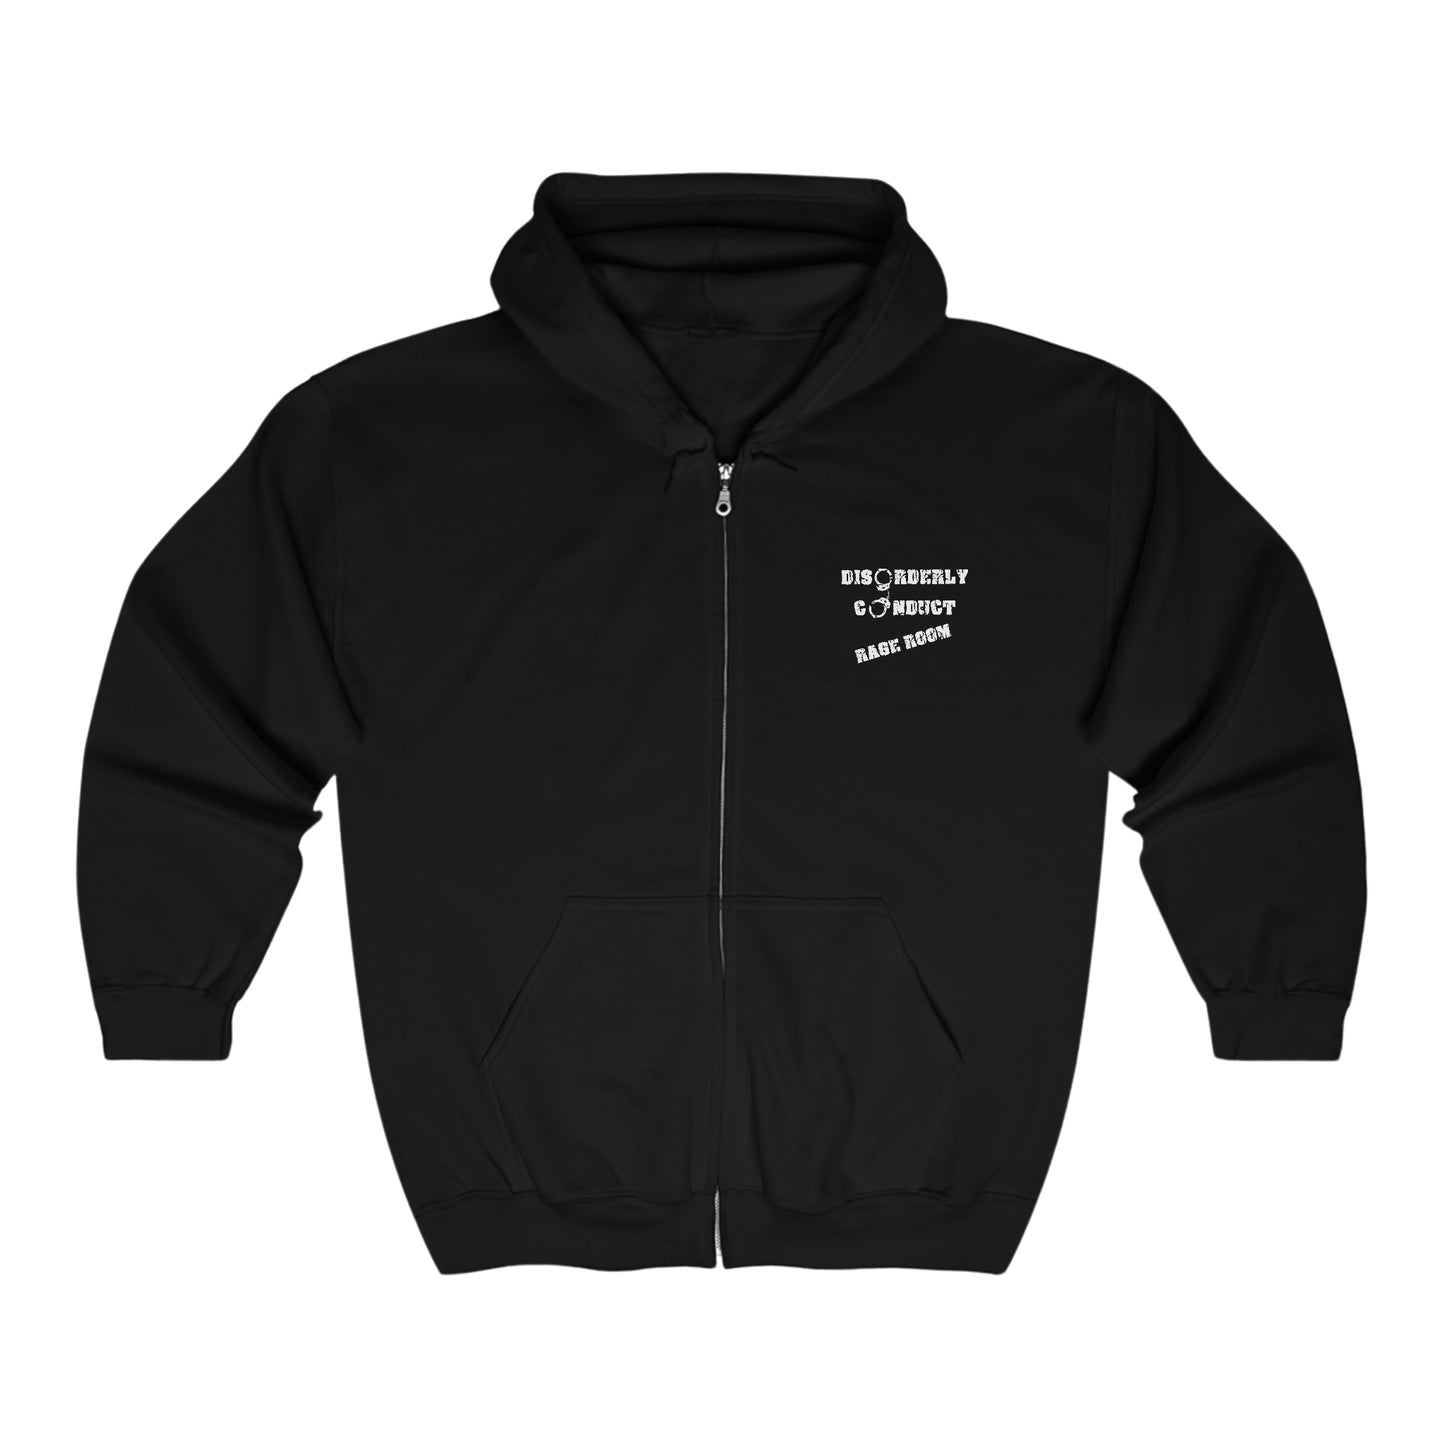 HANGRY VS ANGRY Disorderly Conduct Rage Rooms Unisex Heavy Blend™ Full Zip Hooded Sweatshirt